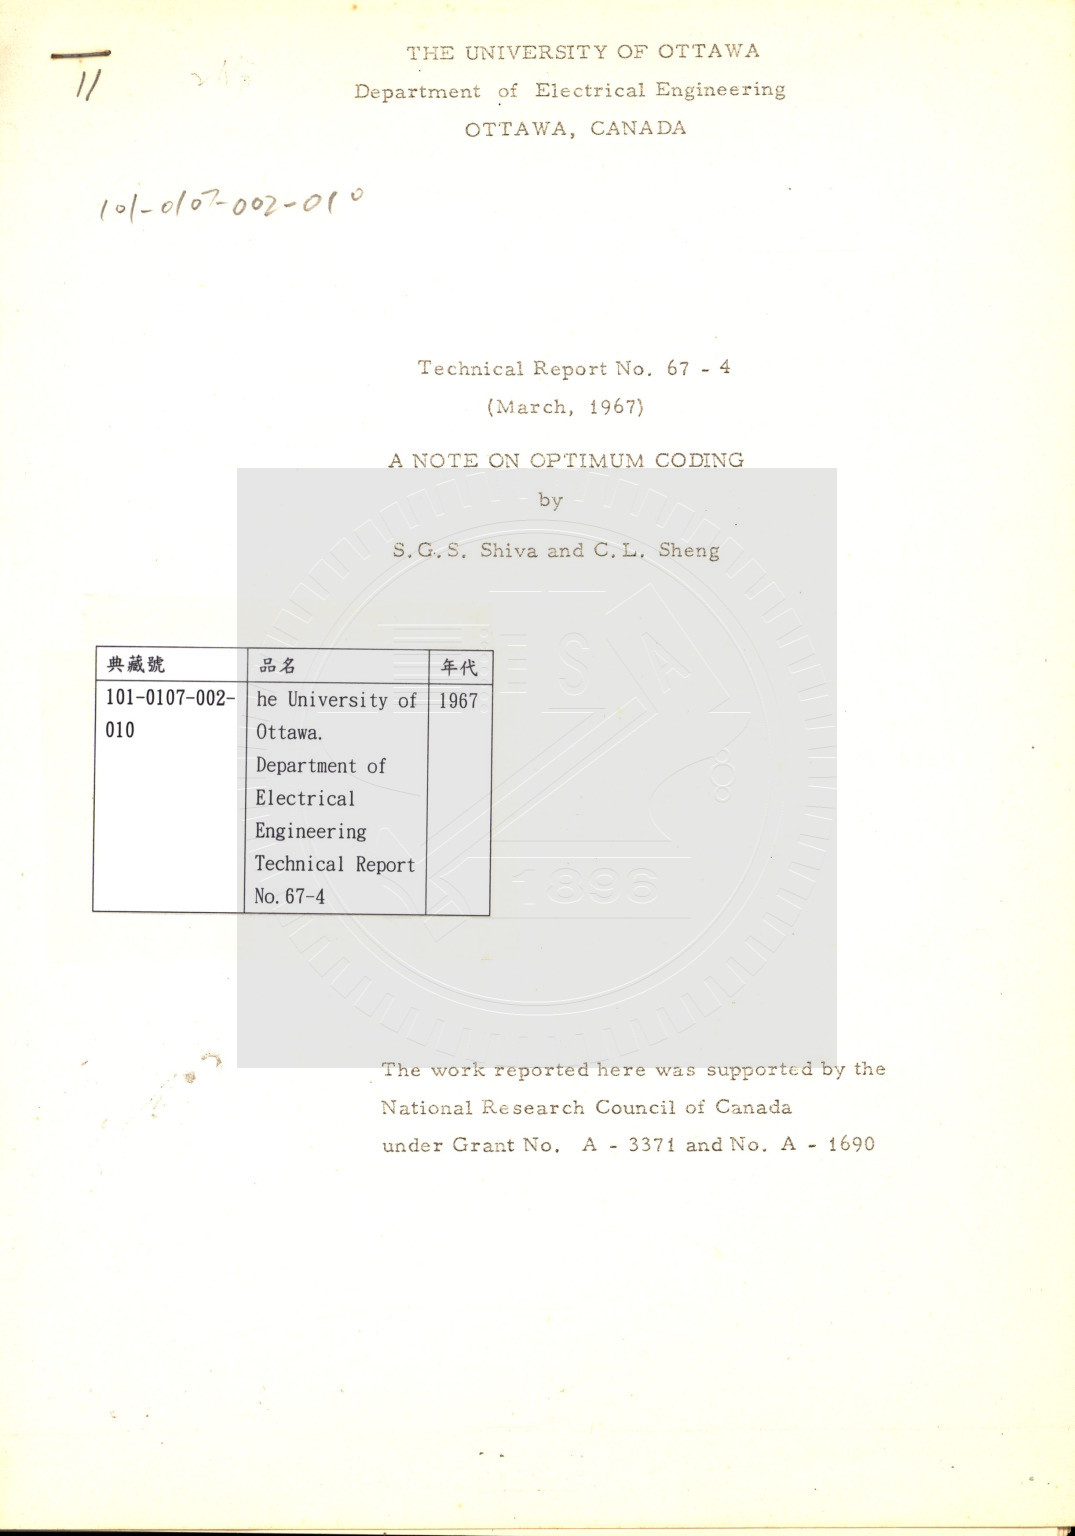 The University of Ottawa. Department of Electrical Engineering Technical Report No.67-4 (March, 1967) A Note on Optimum Coding by S.G.S. Shiva and C. L. Sheng